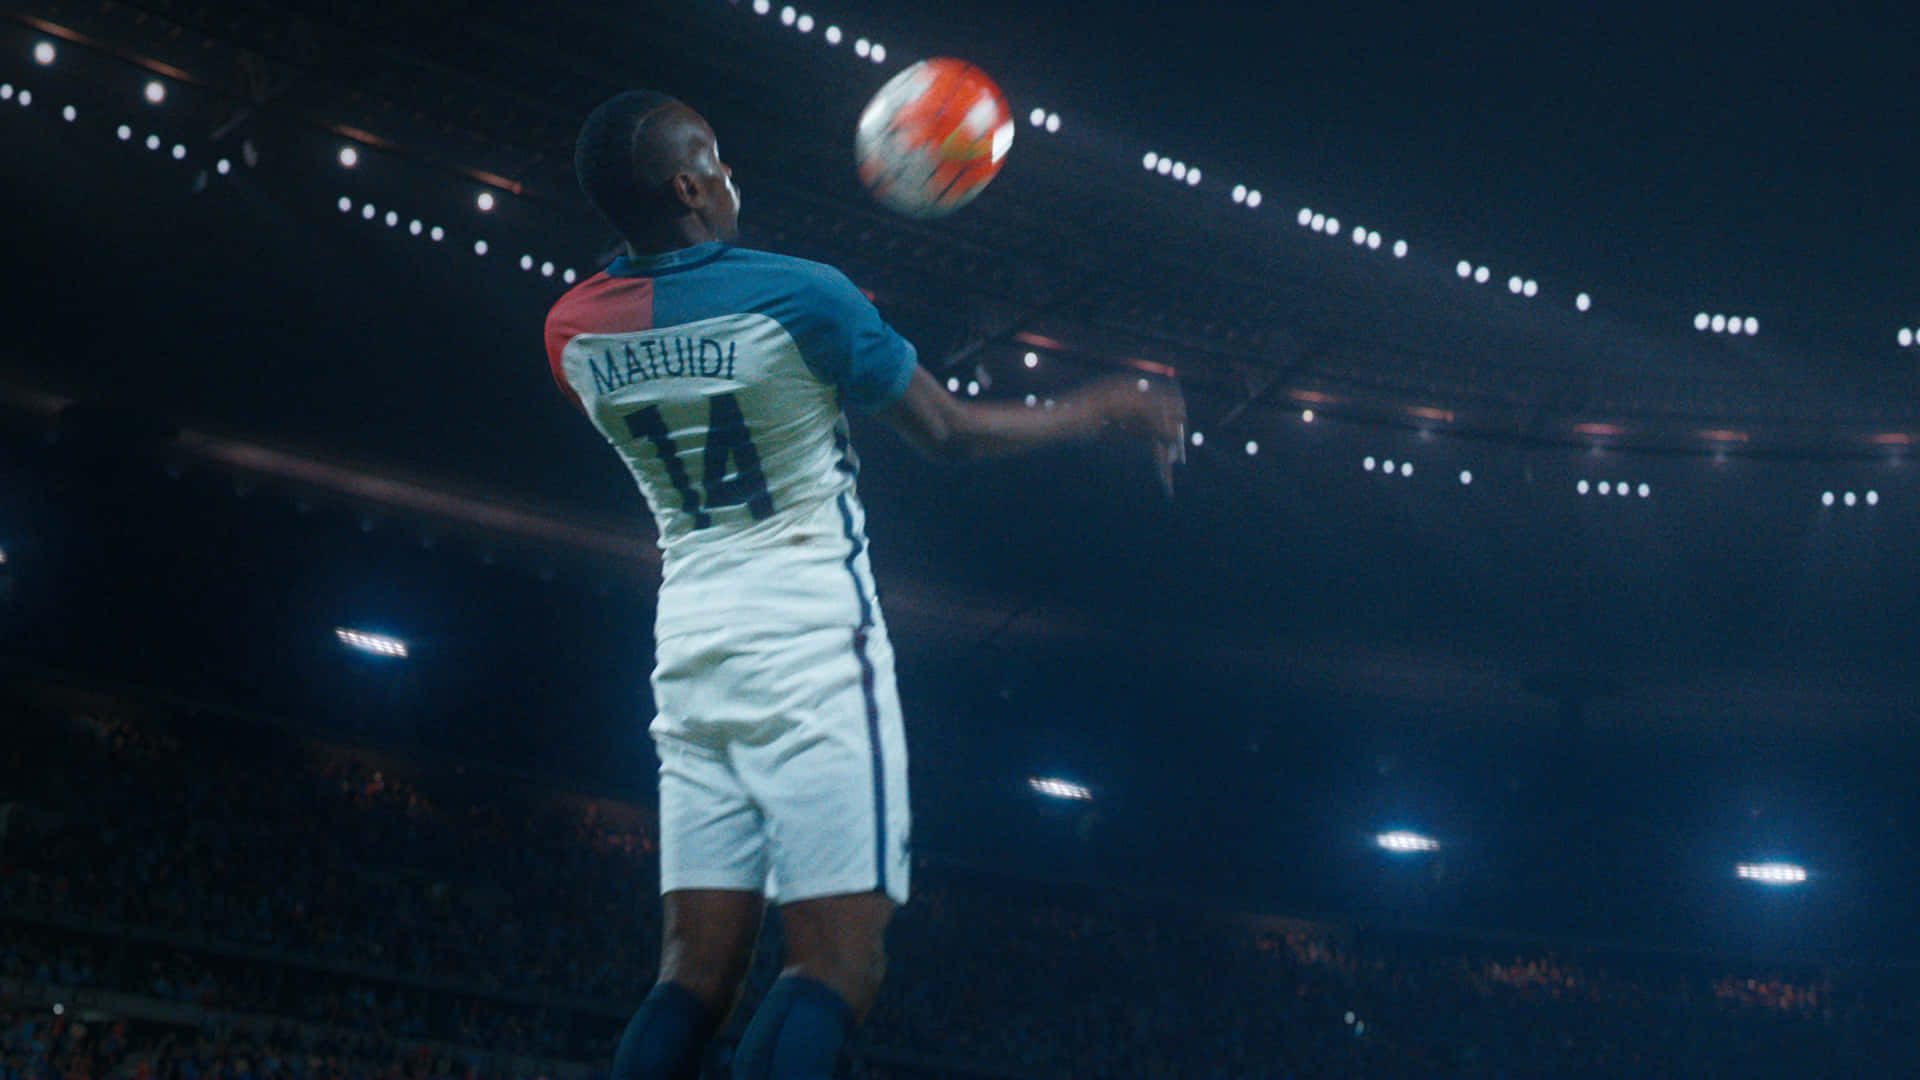 Blaise Matuidi in action, sporting his iconic Jersey Number 14 Wallpaper